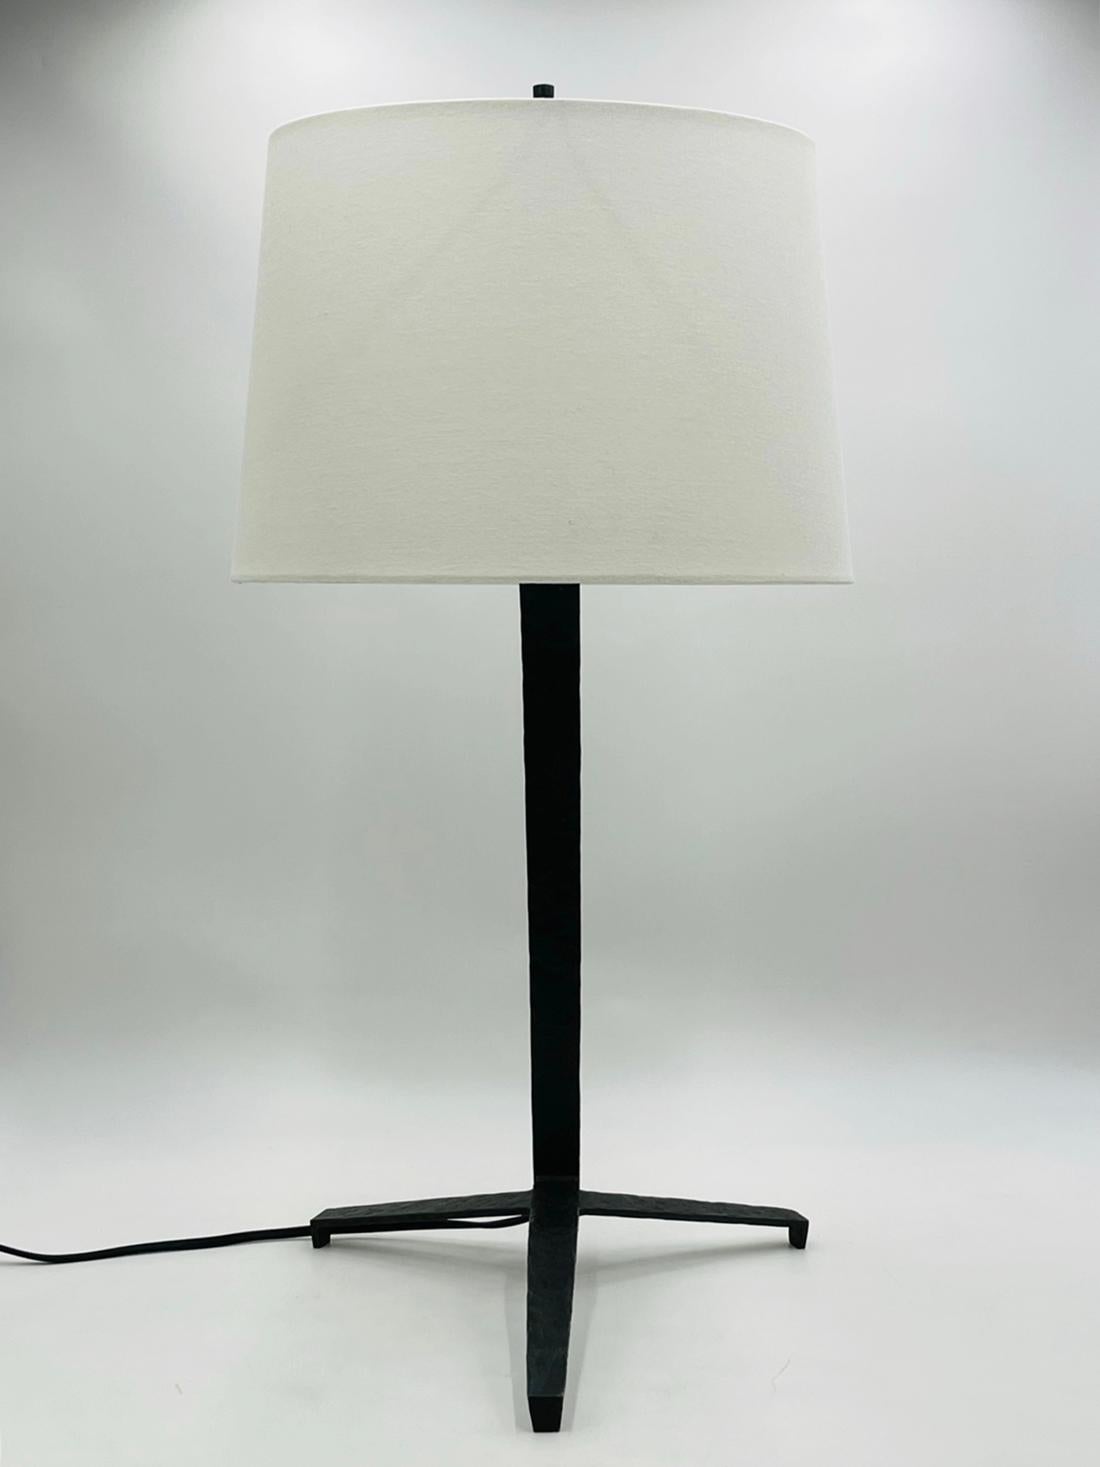 Beautiful table lamp designed by Thomas O'Brien and manufactured by Visual comfort as part of the 